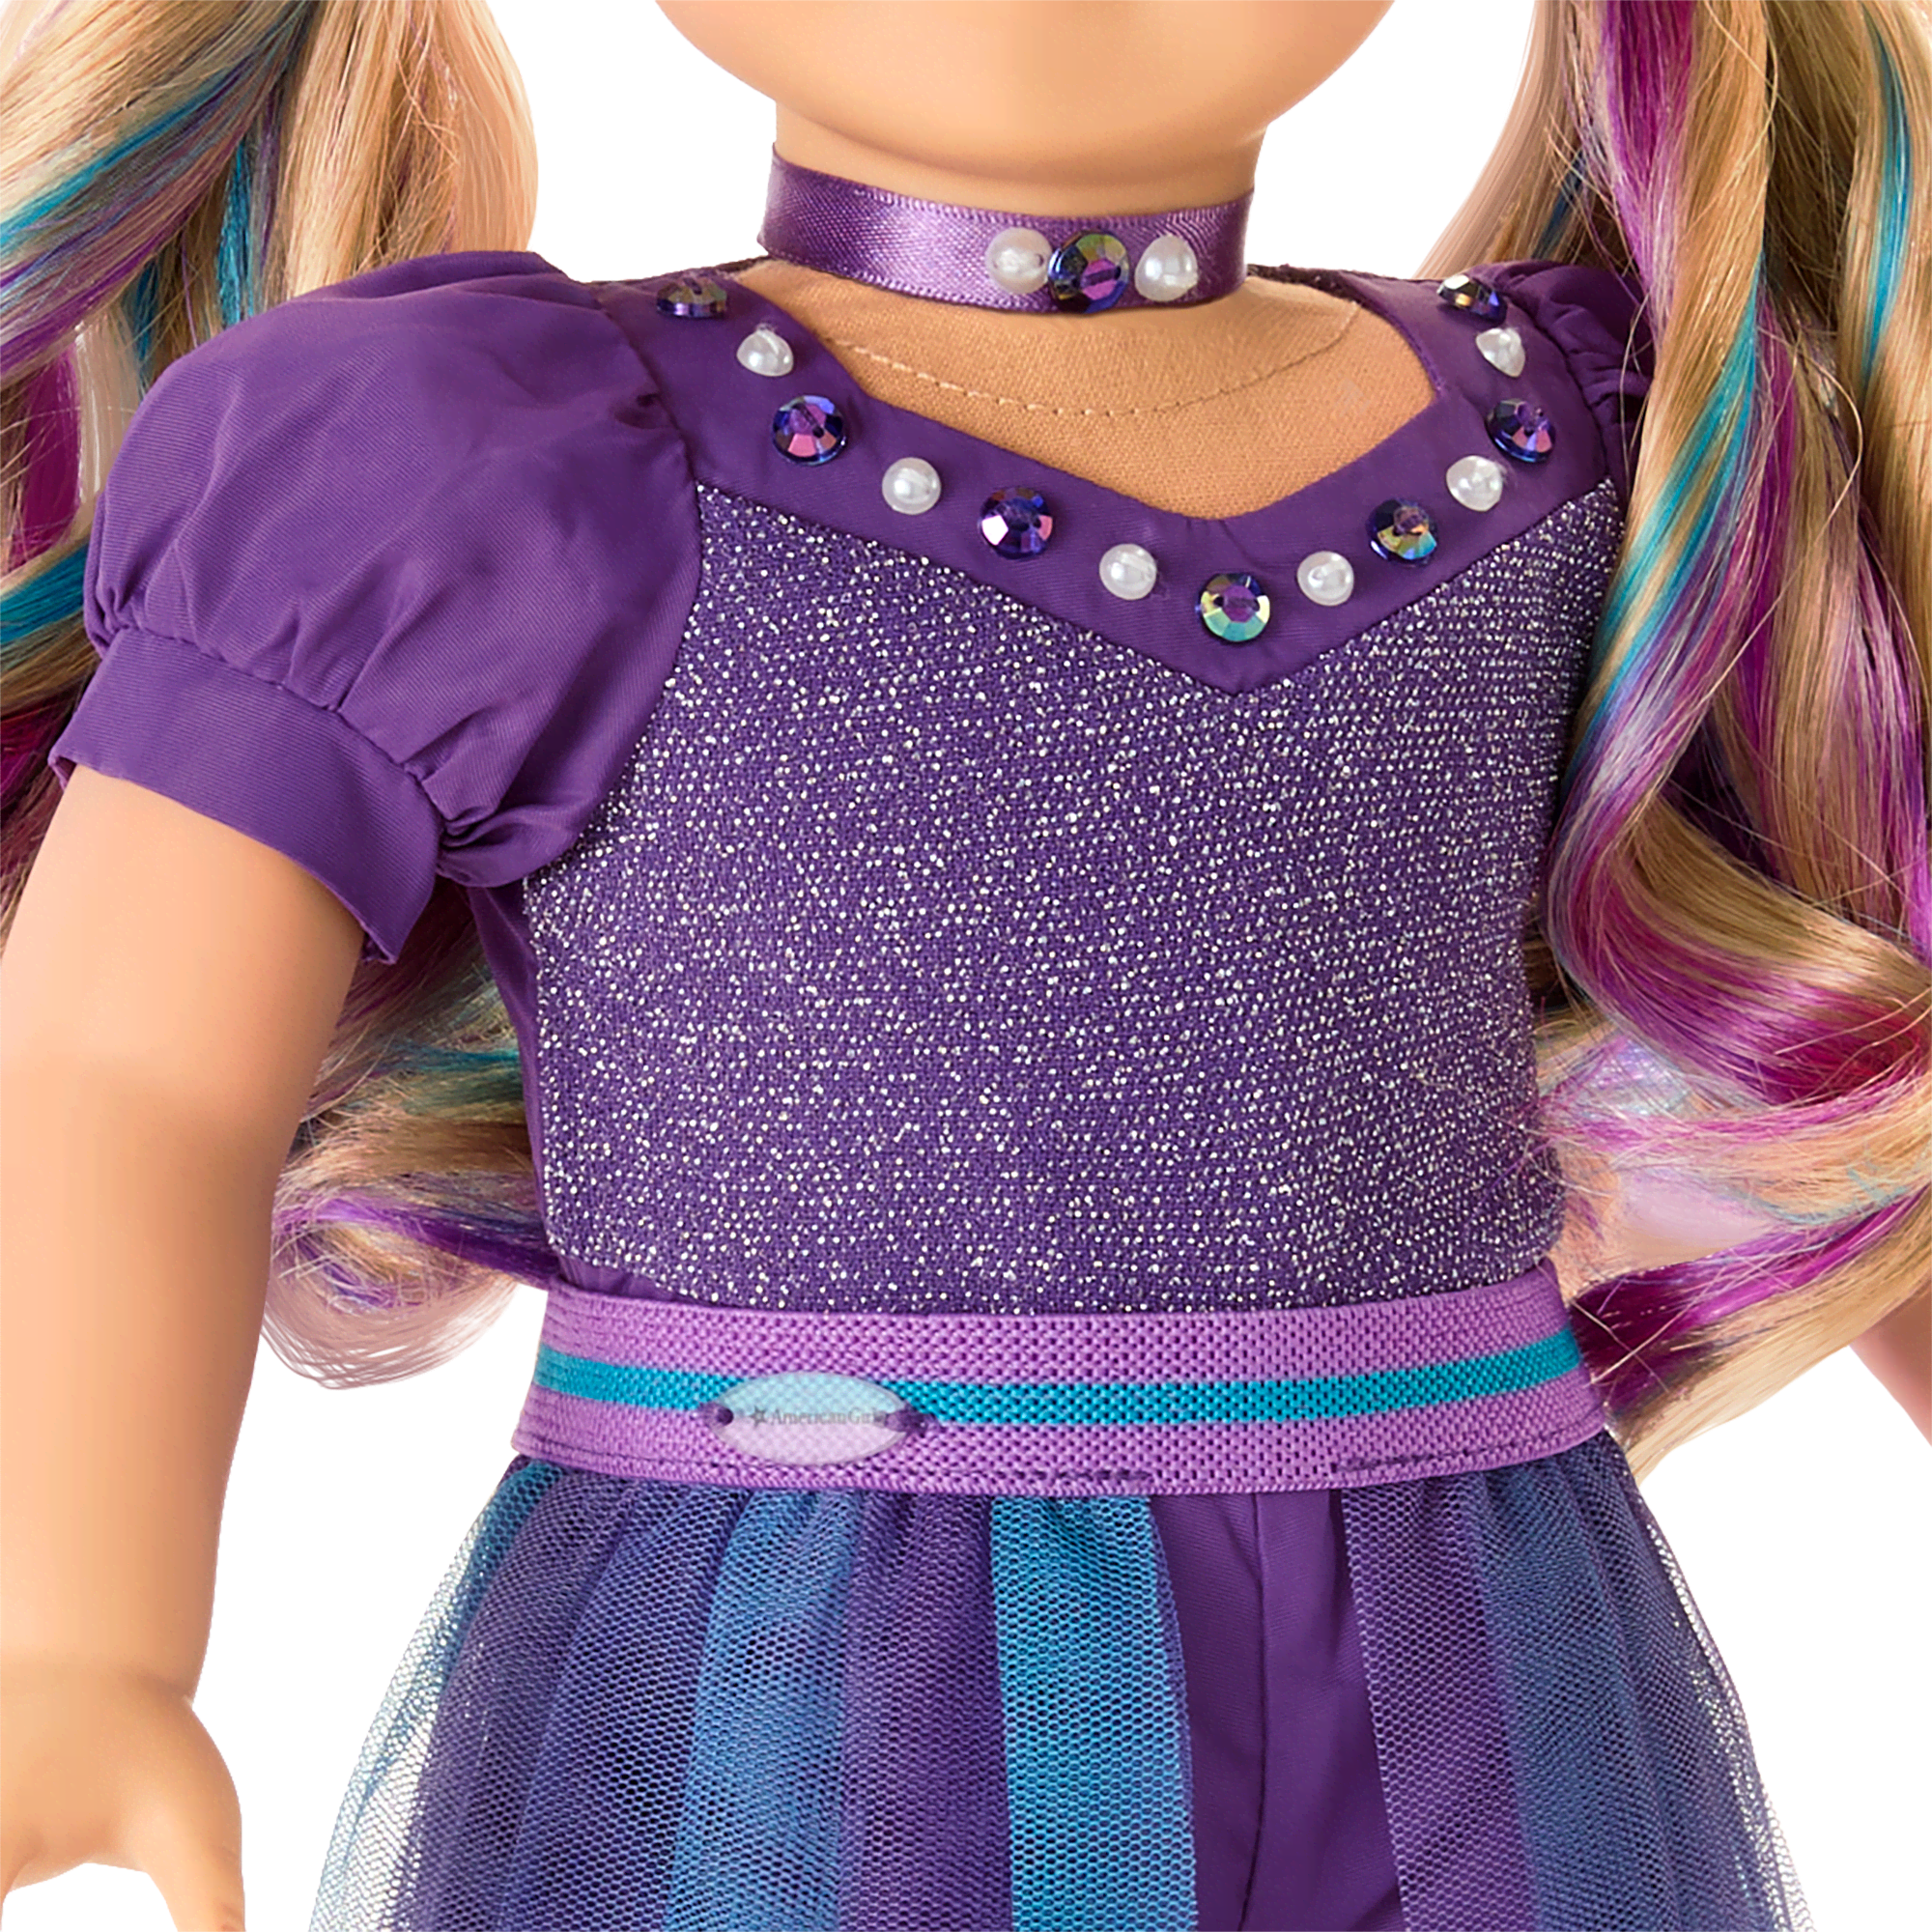 June Exquisite Alexandrite Outfit for 18-inch Dolls